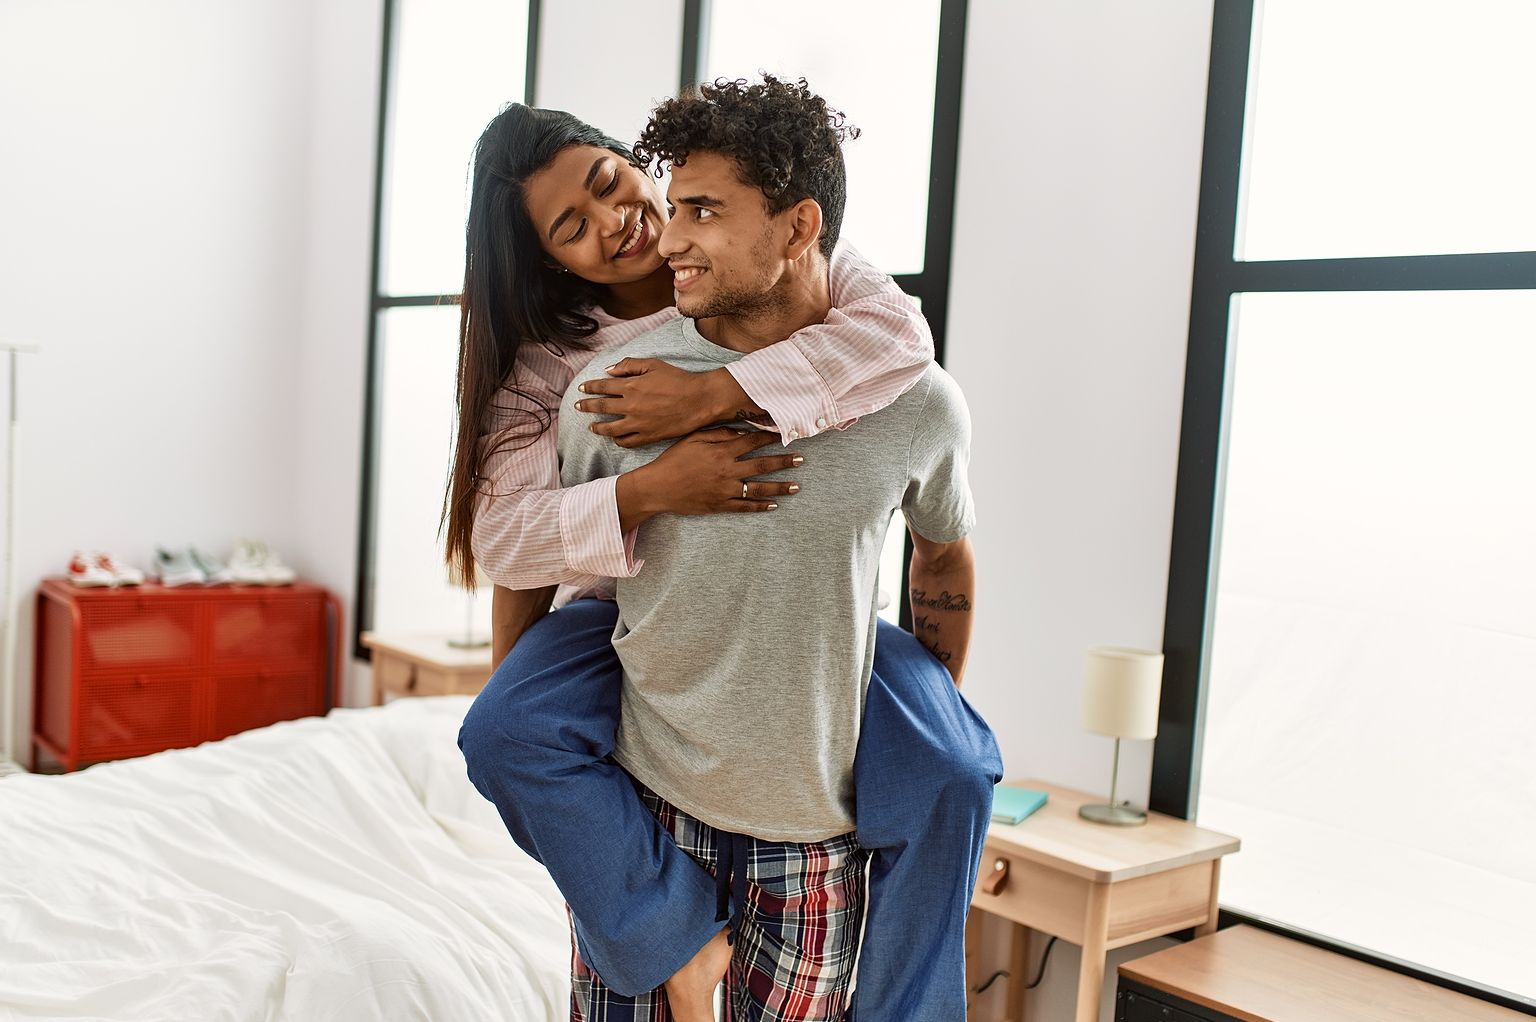 A young latin couple has fun in their room, the man is carrying her while they smile to eachother wearing pijamas.